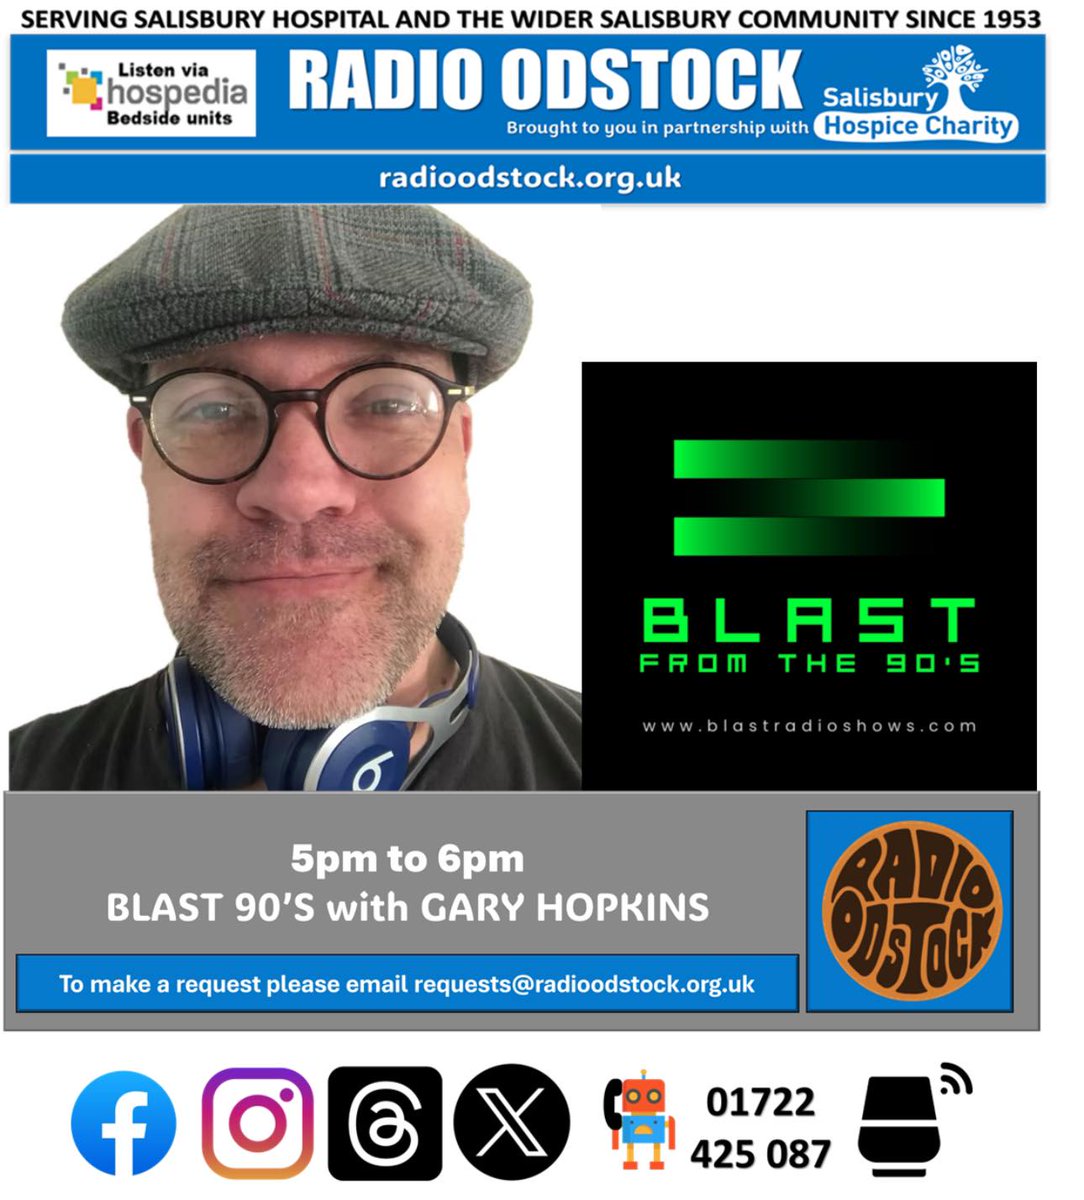 Another Blast from the Past at drive time as Gary brings us the 90s this time.
Listen from 5pm at radioodstock.org.uk
#salisbury #iow #blastfromthepast #90smusic